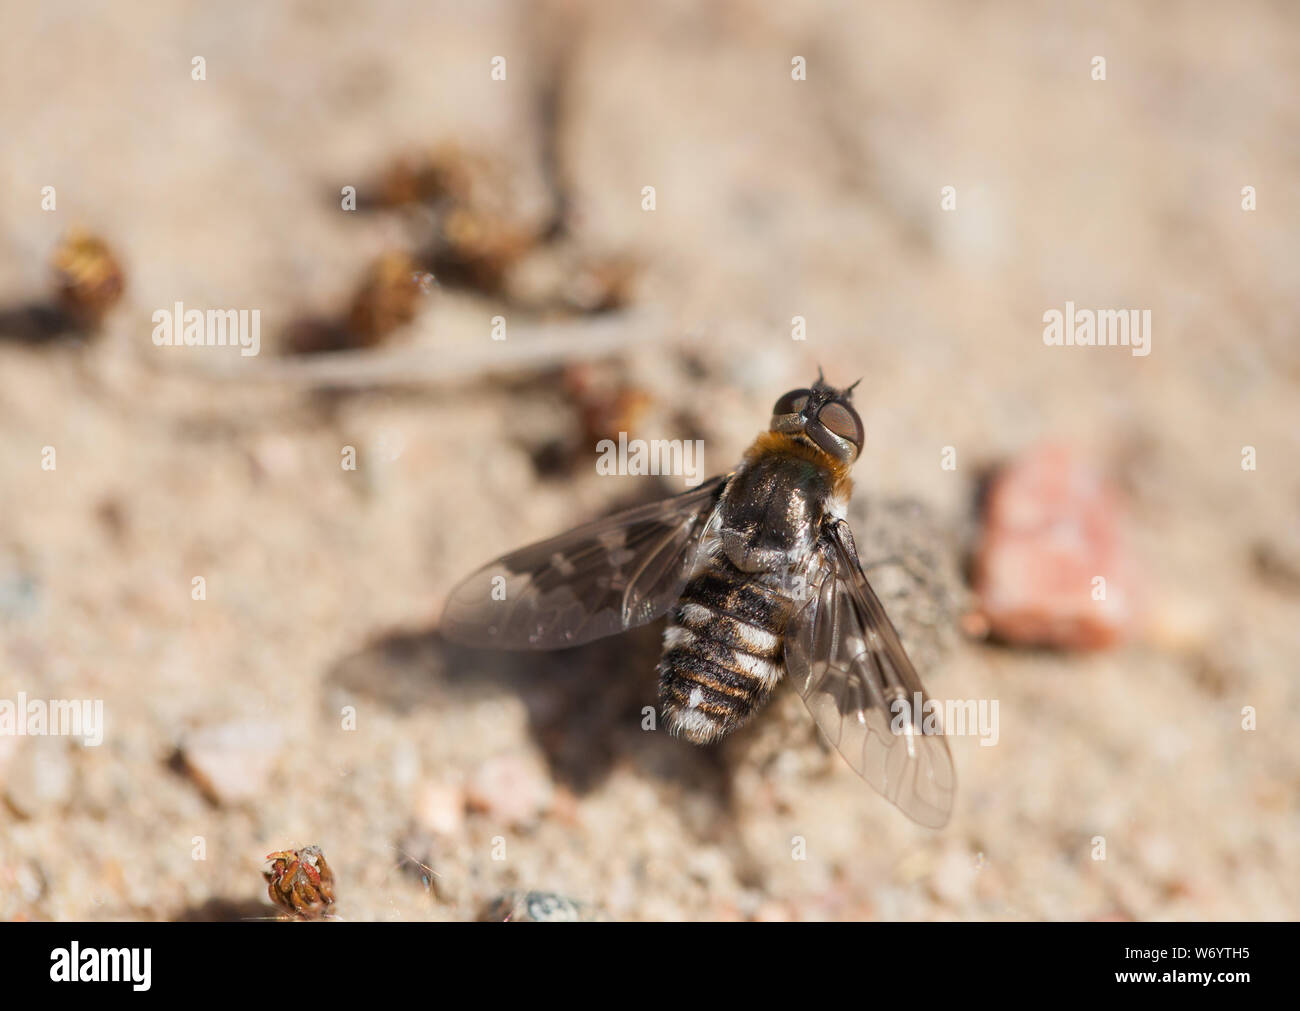 Chiazzato bee-fly Foto Stock